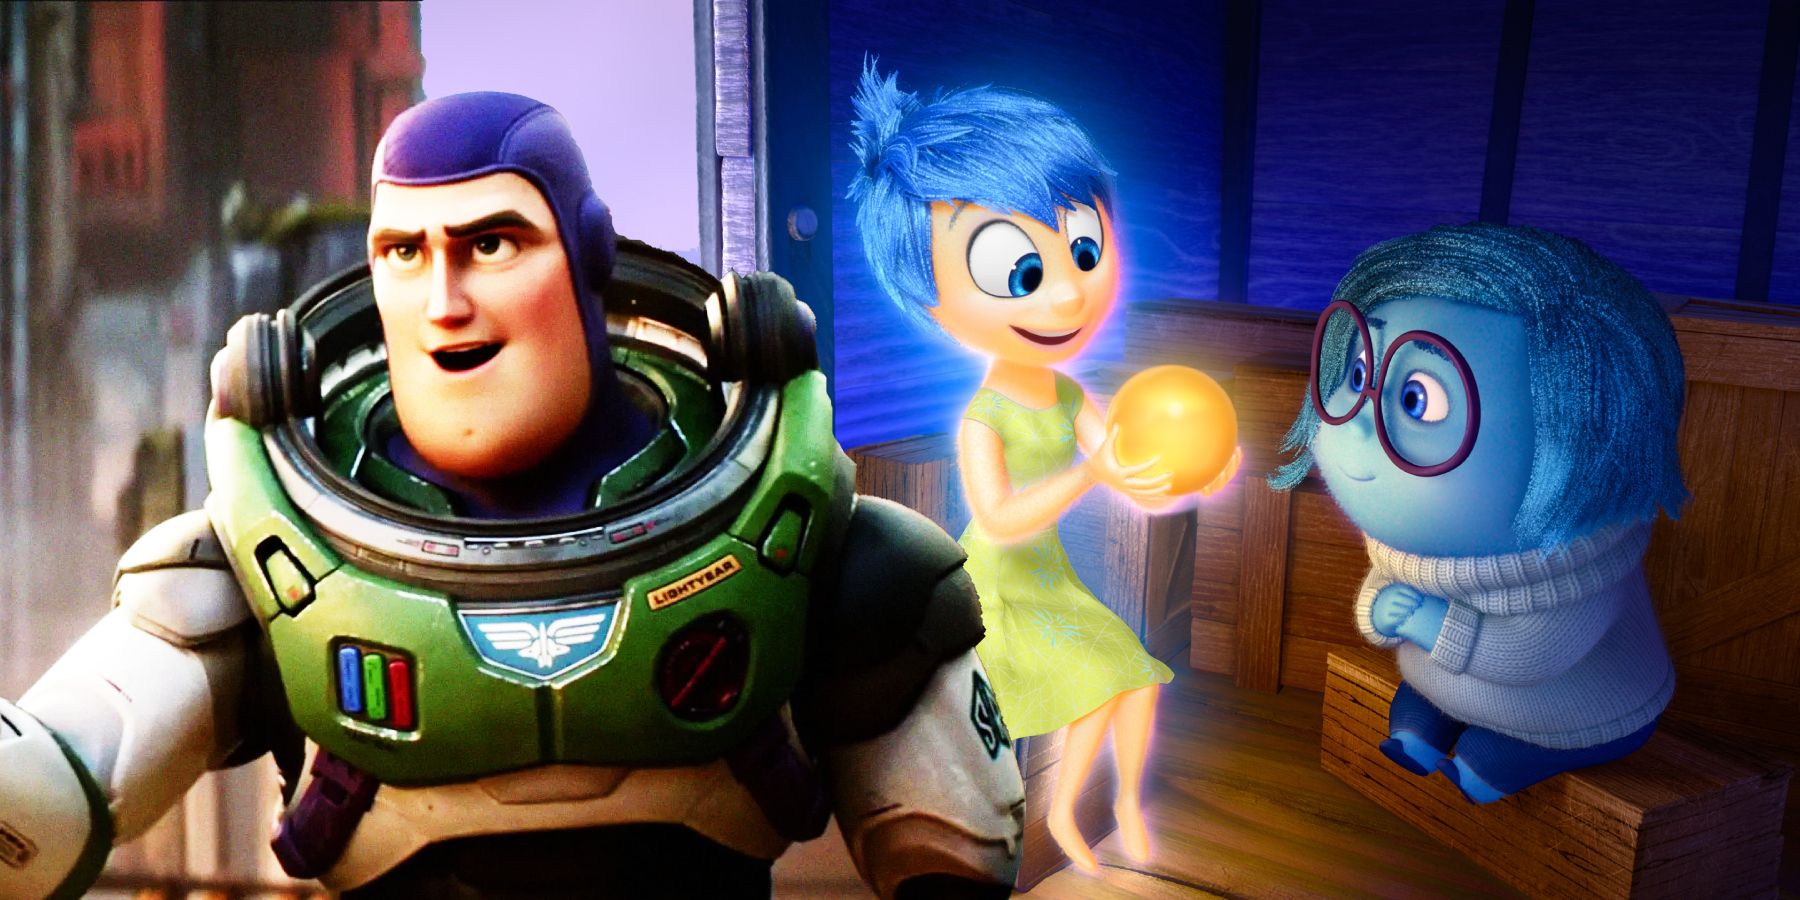 Lightyear's failure at the box office proves a need for Inside Out 2